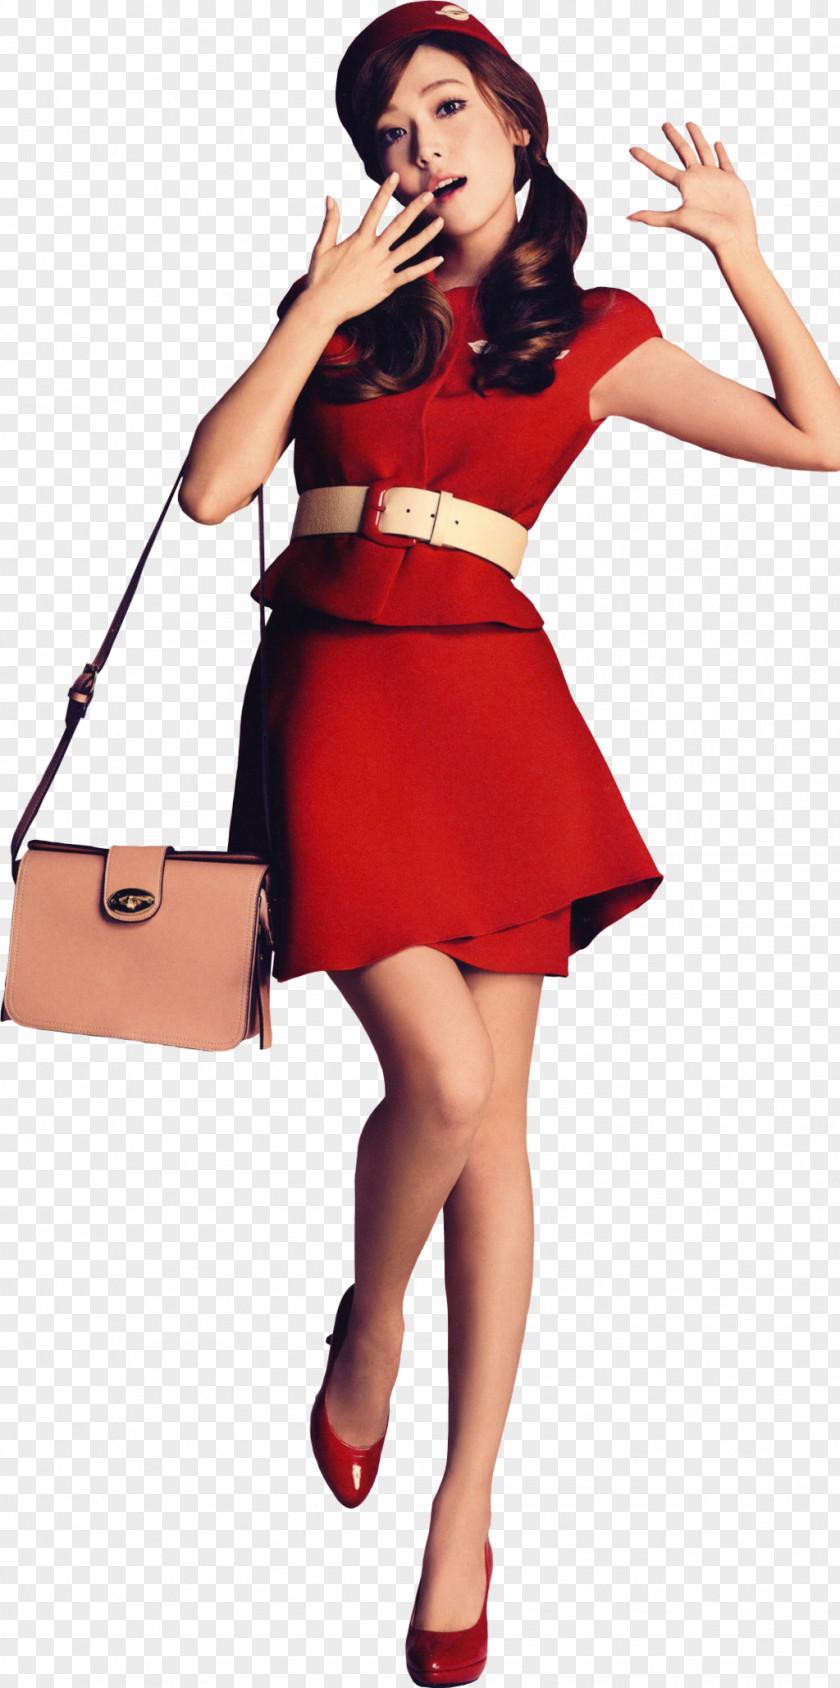 Snsd Fashion Model 1950s Costume Weapon PNG